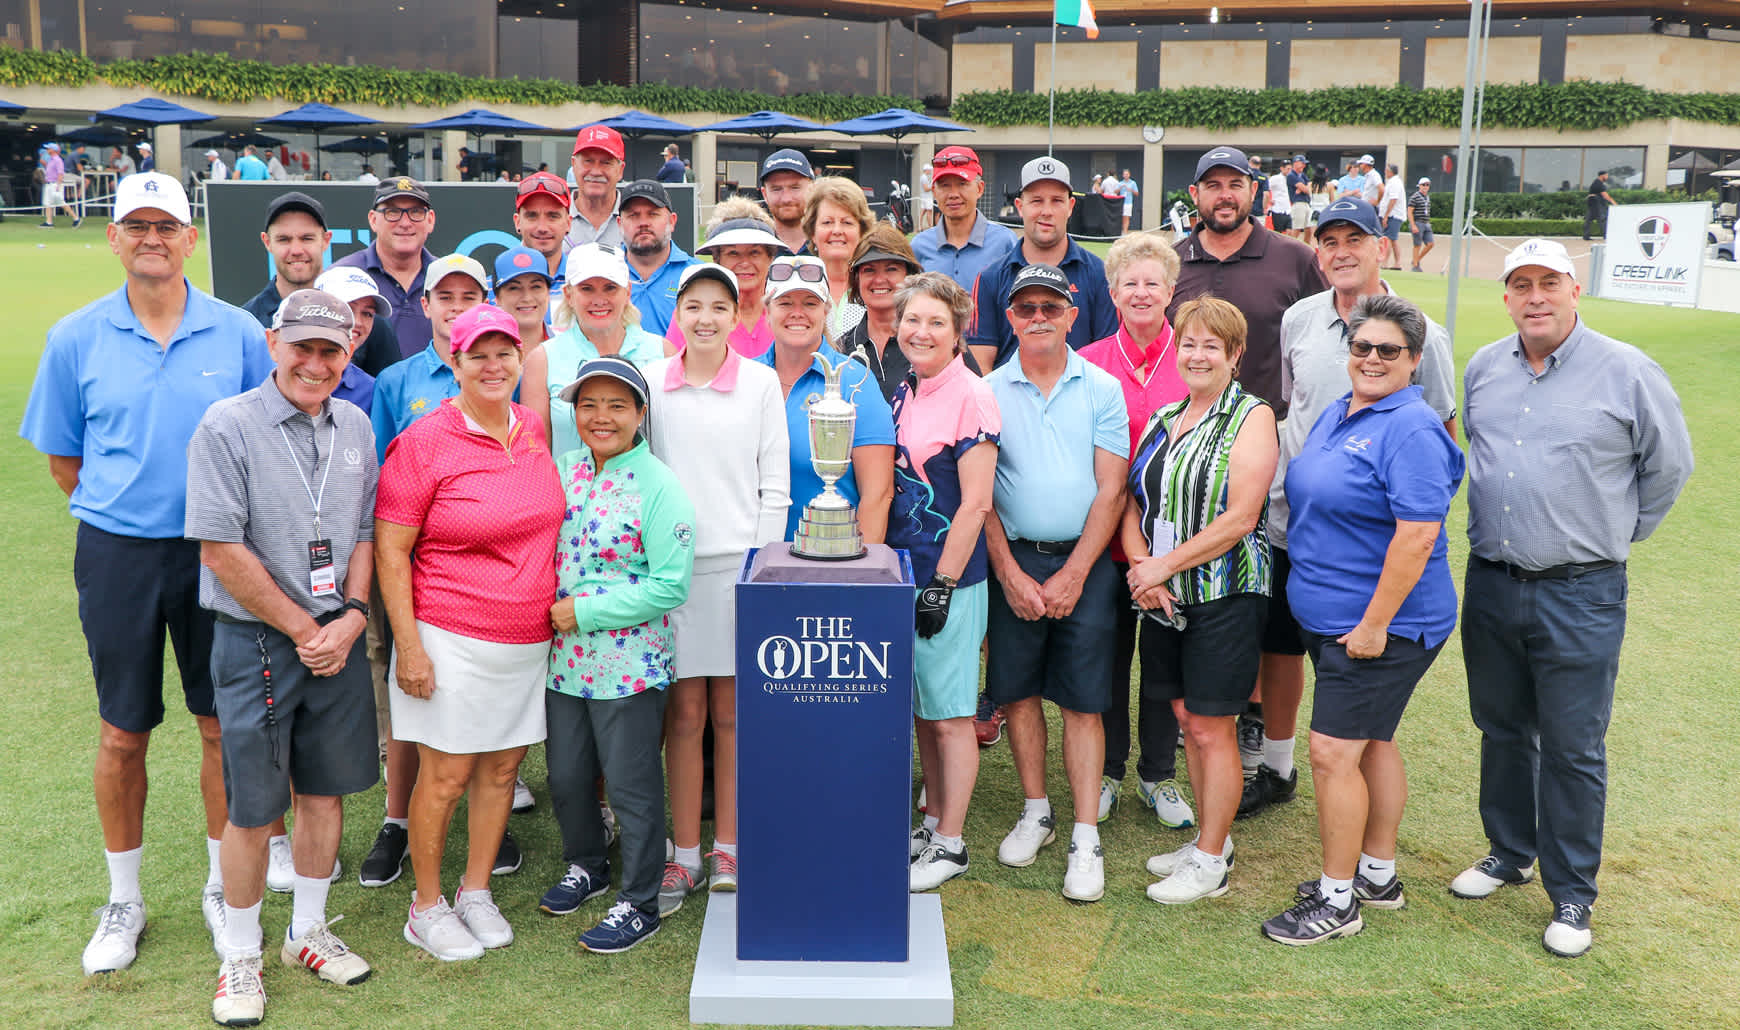 Participants of the 2019 Play 9 final at during the Australian Open.